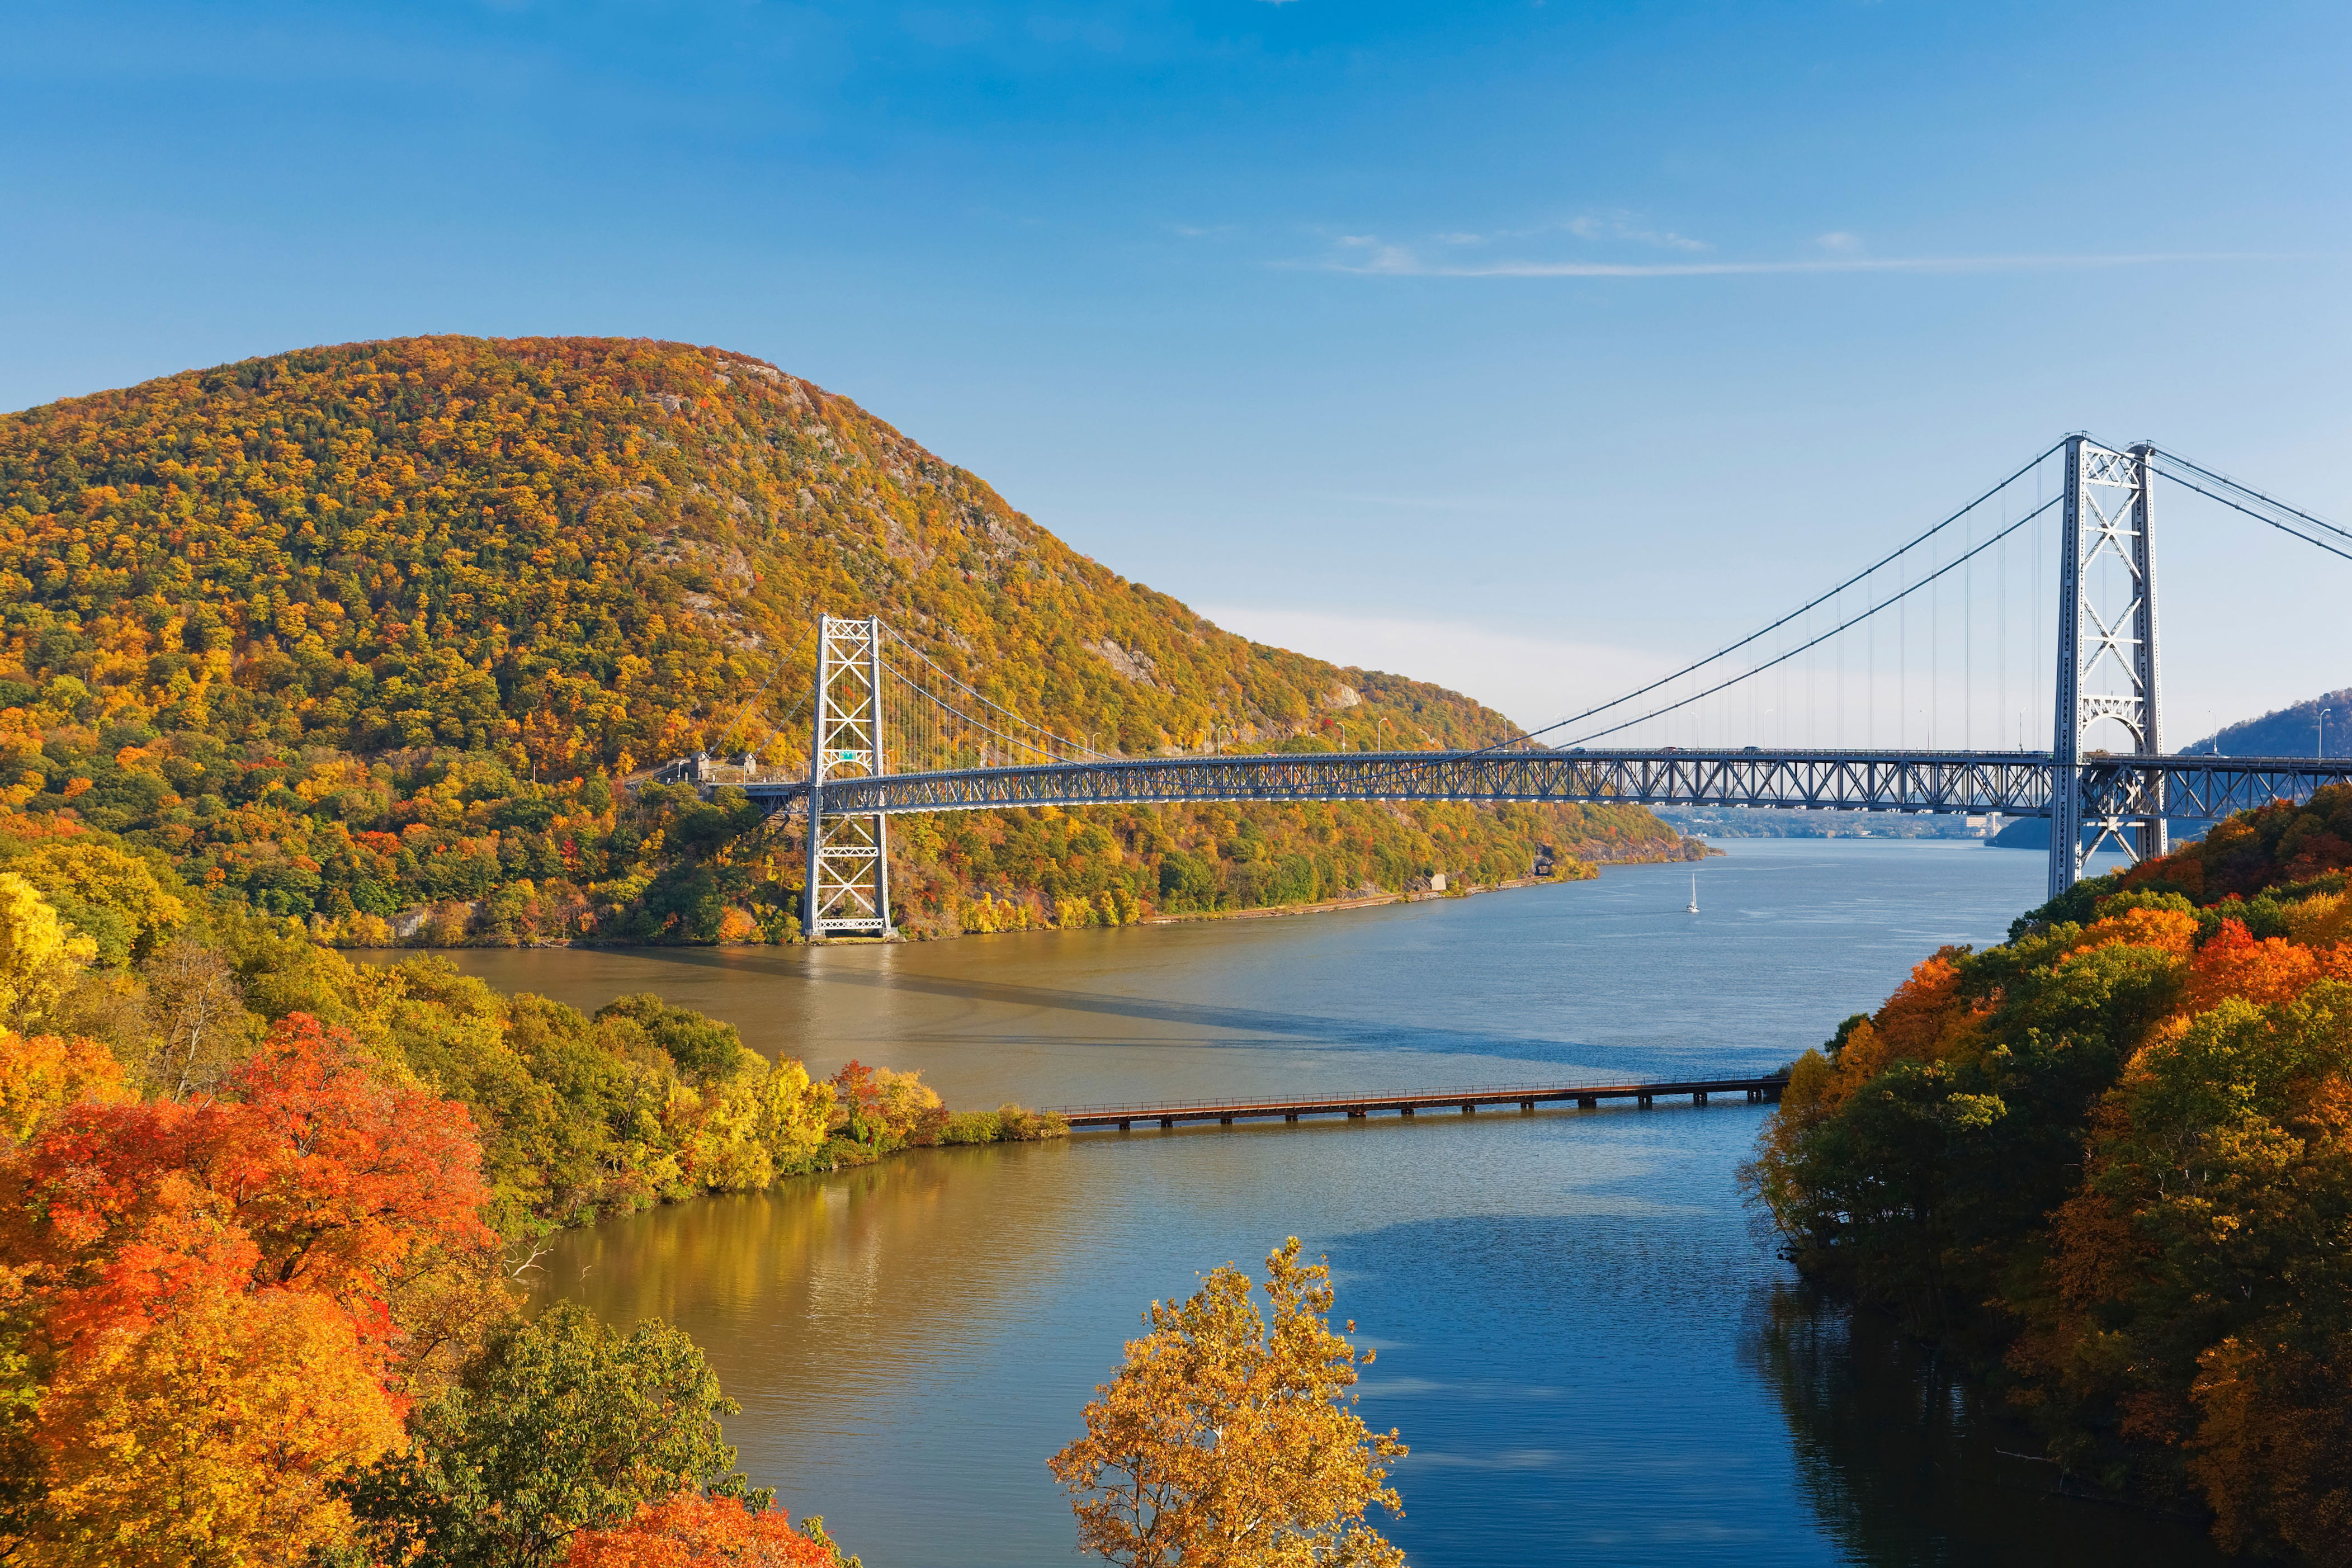 <p>While the Northeast is more known for its <a href="https://www.cntraveler.com/story/hudson-tunnel-project-impact-on-nyc-train-travel?mbid=synd_msn_rss&utm_source=msn&utm_medium=syndication">commuter trains</a> than sightseeing, Amtrak’s Adirondack route is a lovely exception. Relaunched in spring 2023 following its closure during the pandemic, the route runs from <a href="https://www.cntraveler.com/destinations/new-york-city?mbid=synd_msn_rss&utm_source=msn&utm_medium=syndication">New York City</a> to <a href="https://www.cntraveler.com/destinations/montreal?mbid=synd_msn_rss&utm_source=msn&utm_medium=syndication">Montreal</a>. Departing from the new <a href="https://www.cntraveler.com/story/traveling-through-new-yorks-penn-station-just-got-a-lot-more-glamorous?mbid=synd_msn_rss&utm_source=msn&utm_medium=syndication">Moynihan Train Hall</a> at Penn Station, the 10-hour train travels along the Hudson River up until Albany, then passes through Saratoga Springs and the dazzling Lake Champlain before arriving in Canada. Take this route in the fall <a href="https://www.cntraveler.com/gallery/best-fall-foliage-train-rides-in-the-us?mbid=synd_msn_rss&utm_source=msn&utm_medium=syndication">during peak foliage season</a> to watch New England’s changing autumnal colors glide by your window.</p> <p><a href="https://www.amtrak.com/tickets-reservations">Tickets from $$62</a></p><p>Sign up to receive the latest news, expert tips, and inspiration on all things travel</p><a href="https://www.cntraveler.com/newsletter/the-daily?sourceCode=msnsend">Inspire Me</a>